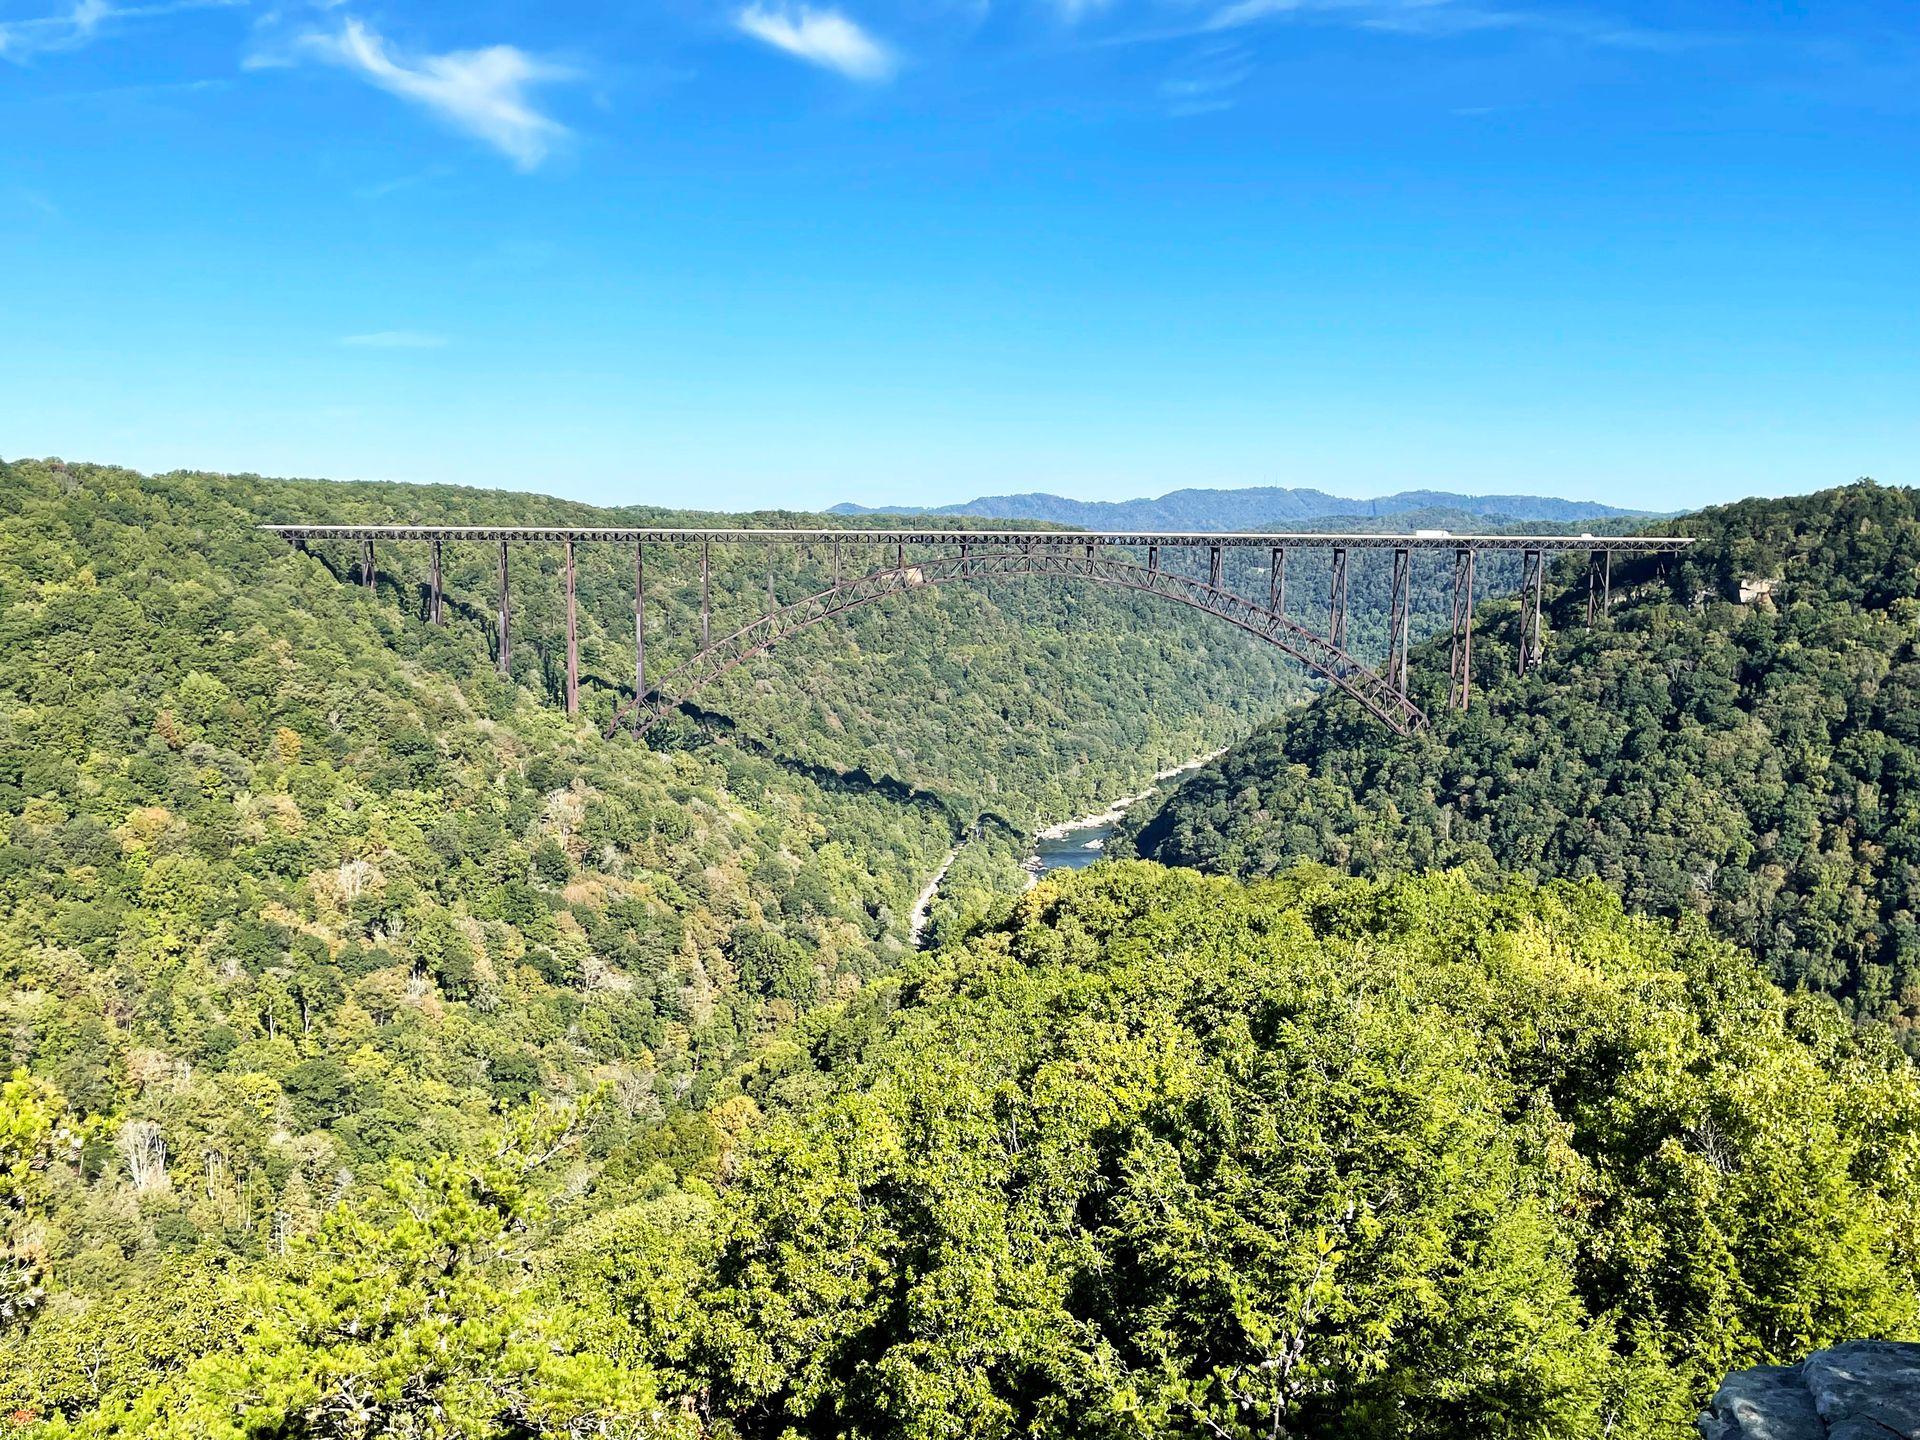 A view of the New River Gorge Bridge from the end of the Long Point Trail. It is surrounded by green trees.